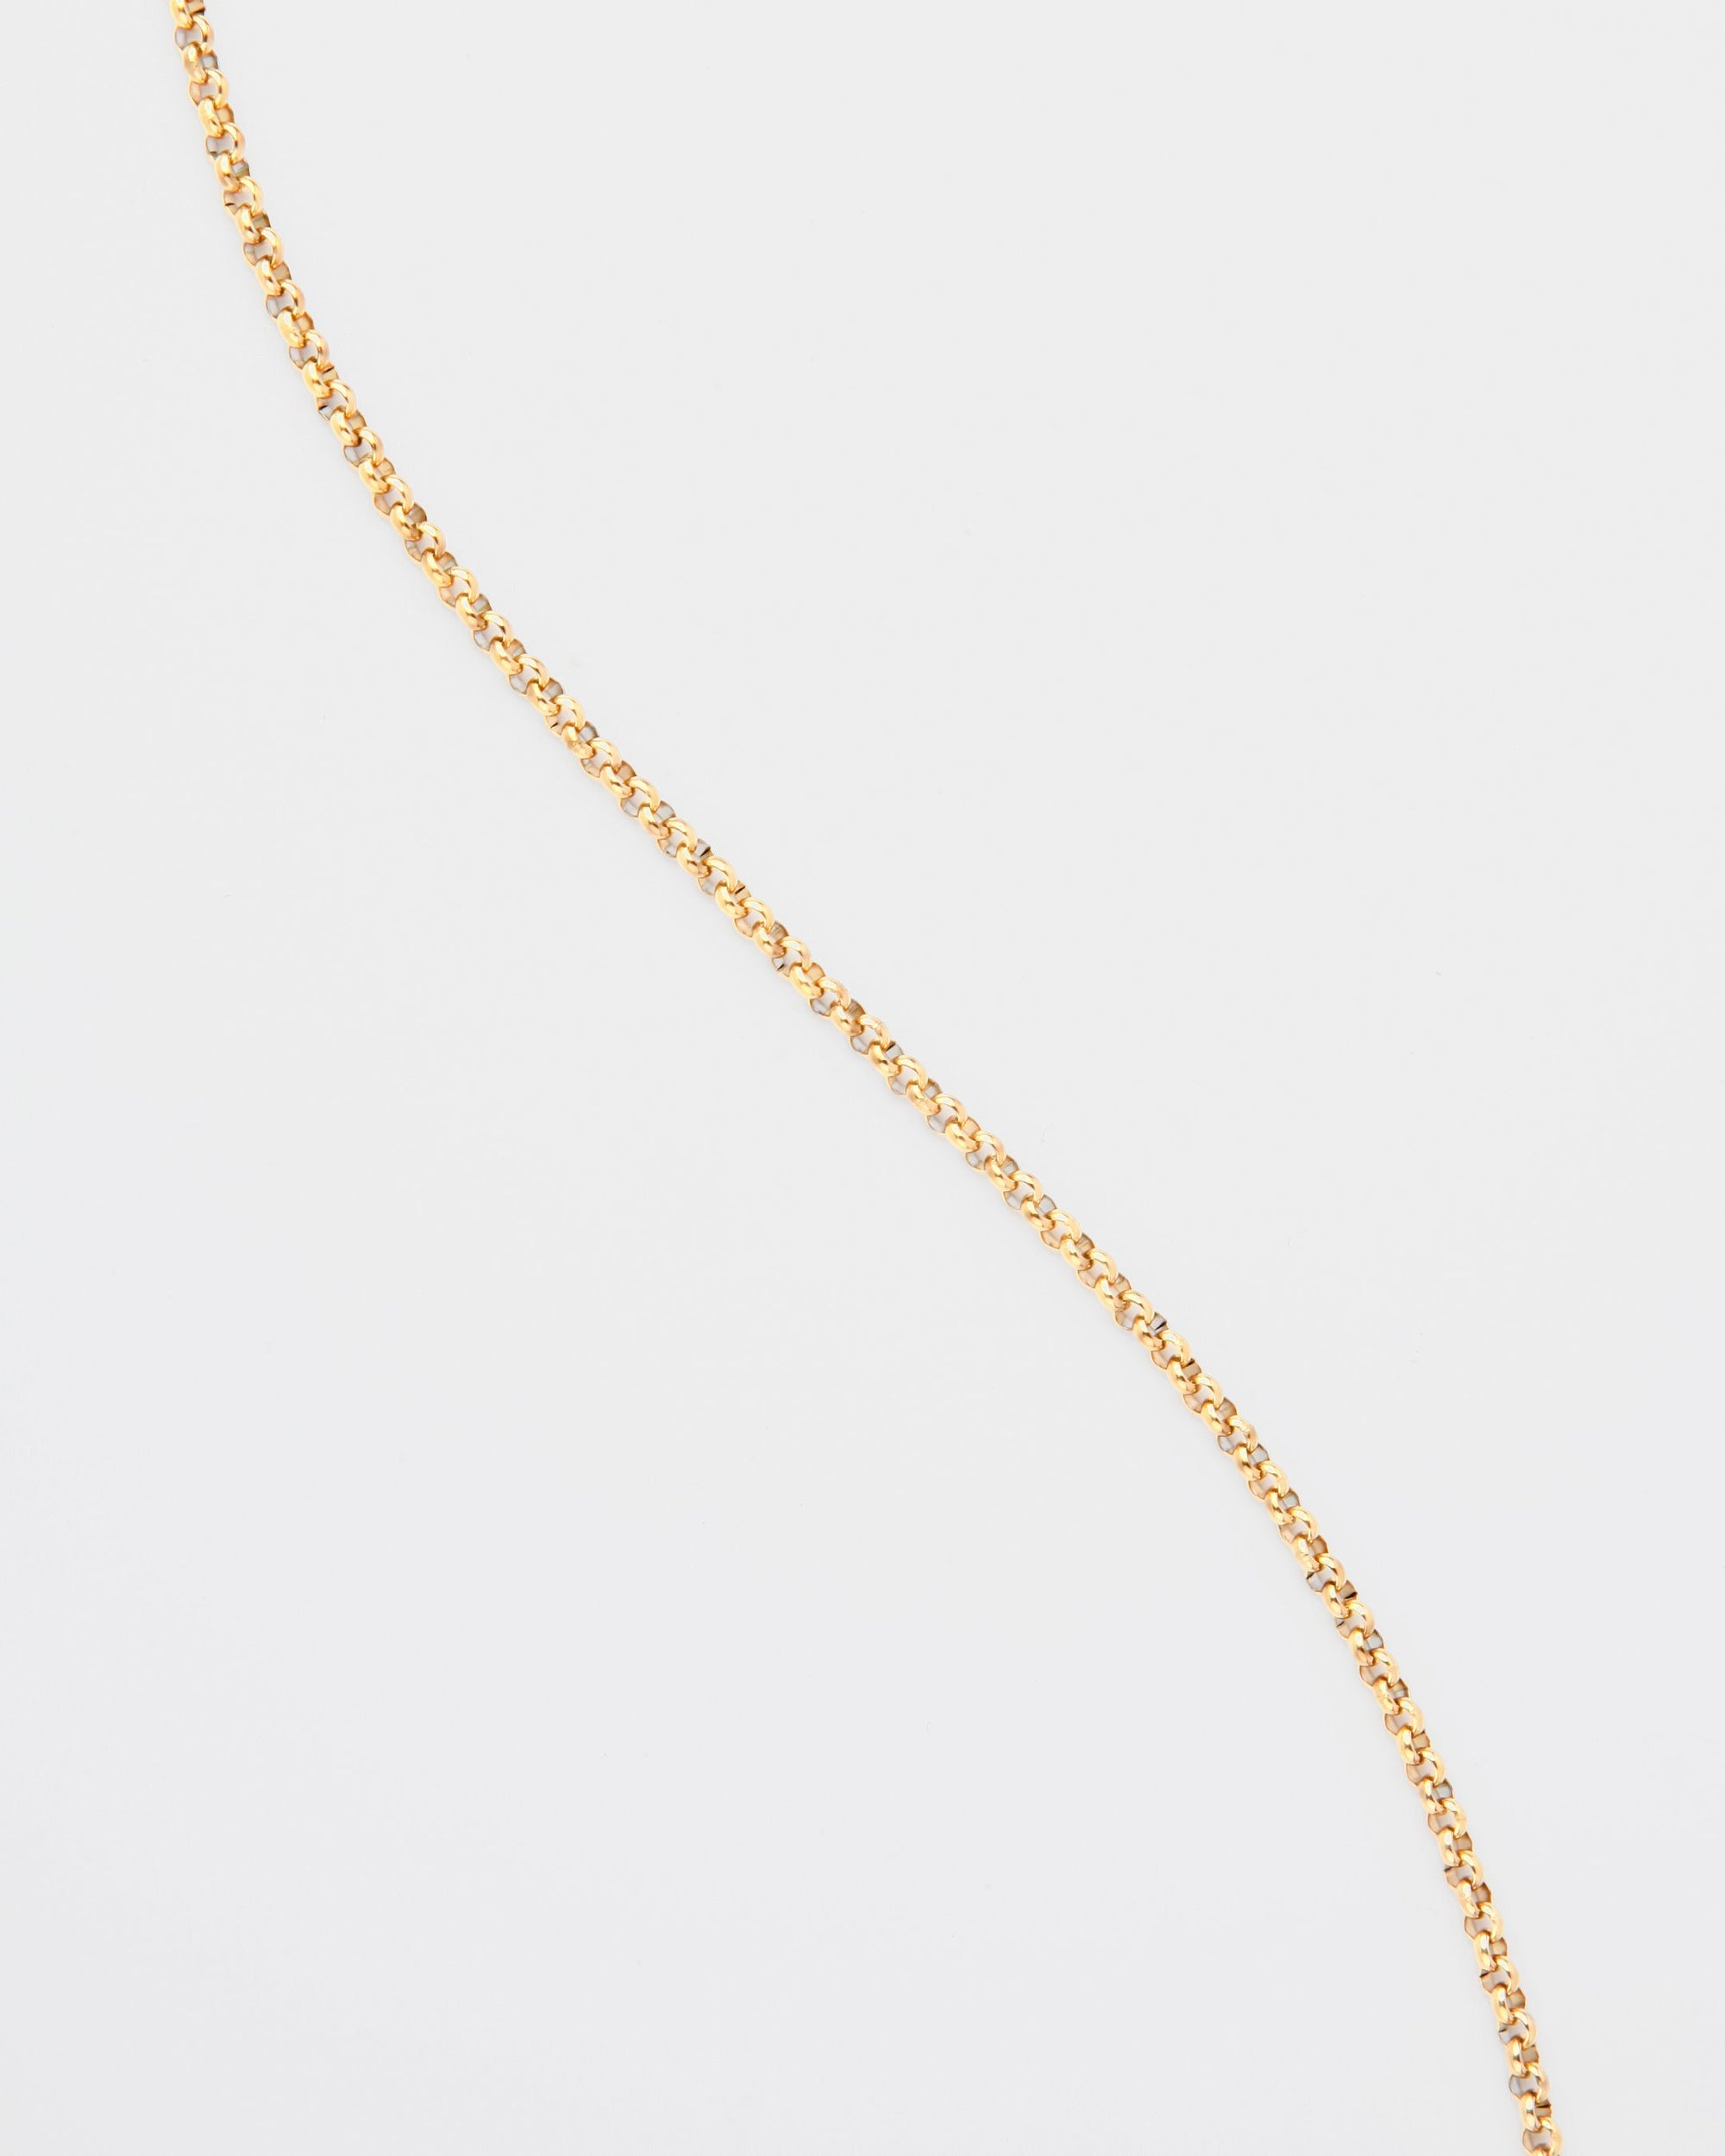 A thin, 18K gold-plated chain with small, round links is draped diagonally across a plain white background. The Florentina Glasses Chain by For Art&#39;s Sake® is simple and elegant with a slight shine.